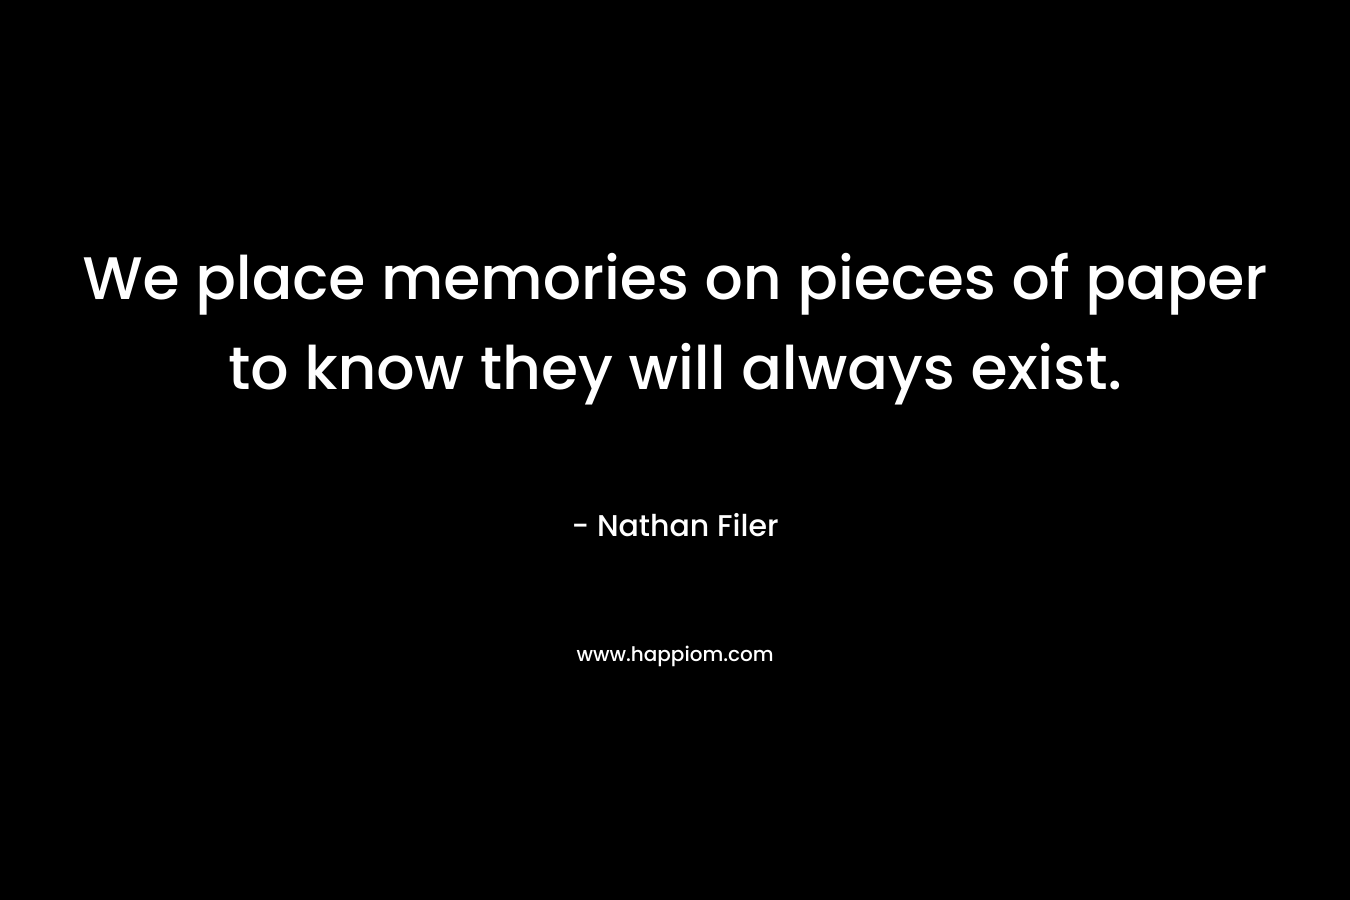 We place memories on pieces of paper to know they will always exist. – Nathan Filer